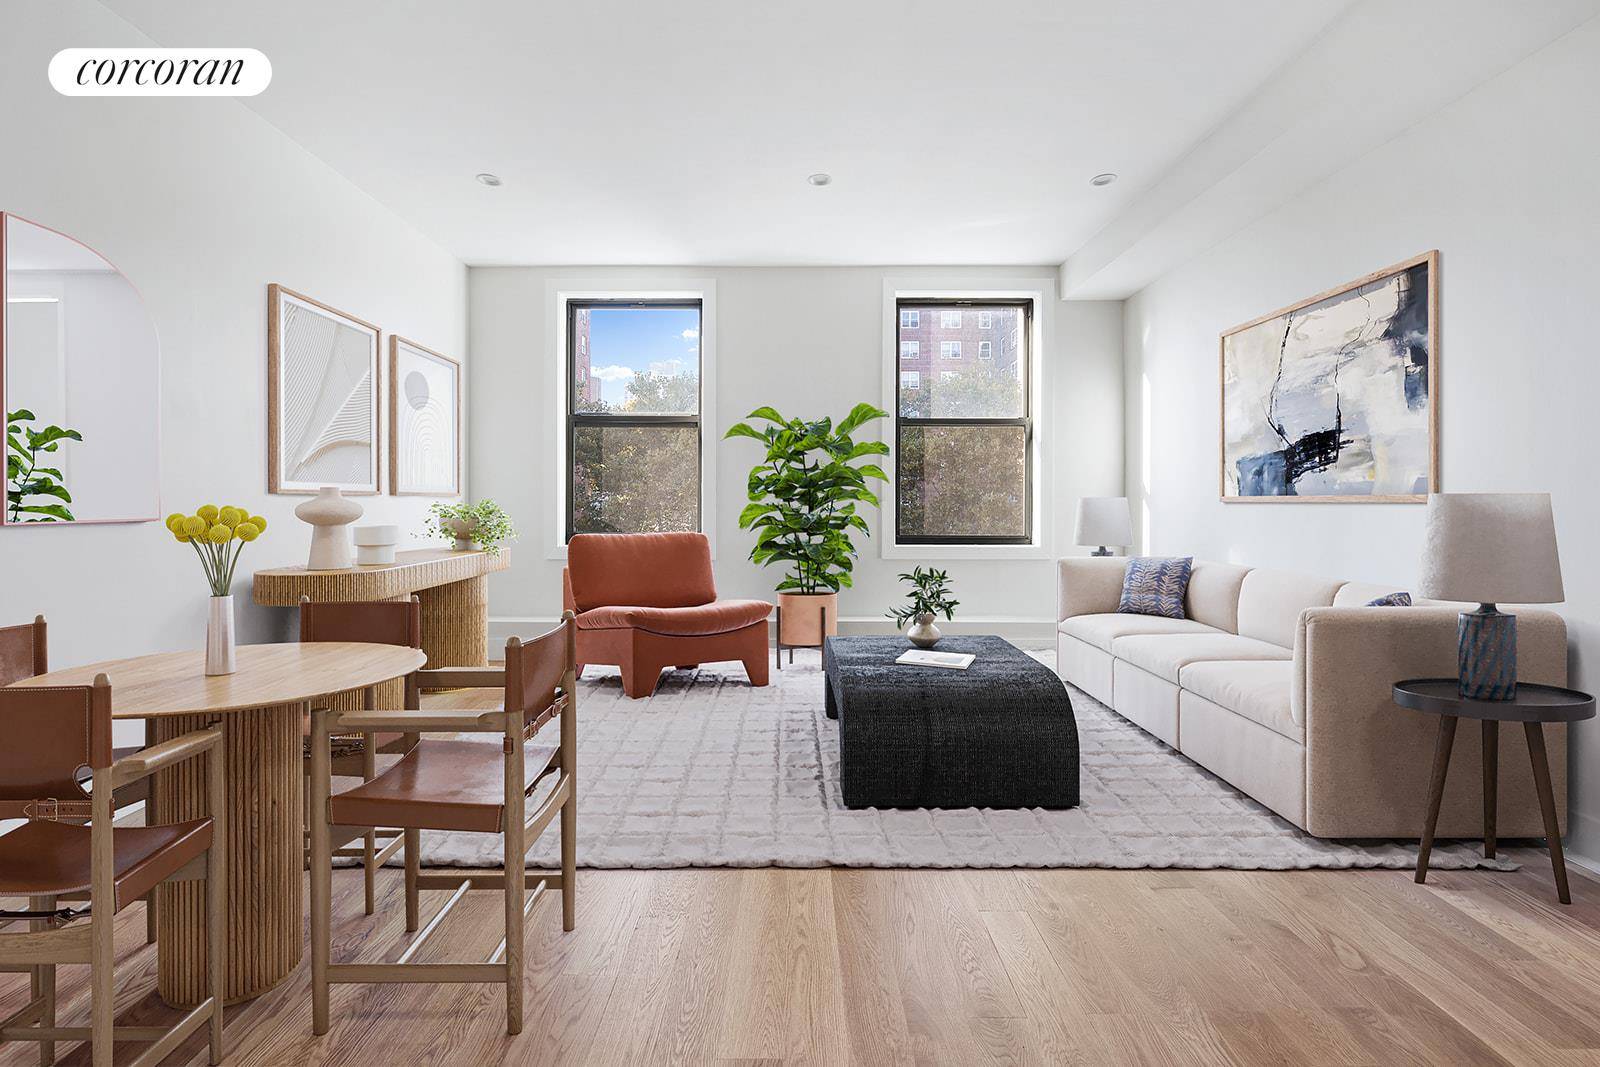 Welcome to 265 West 131st Street, one of Harlem's newest boutique condominiums.